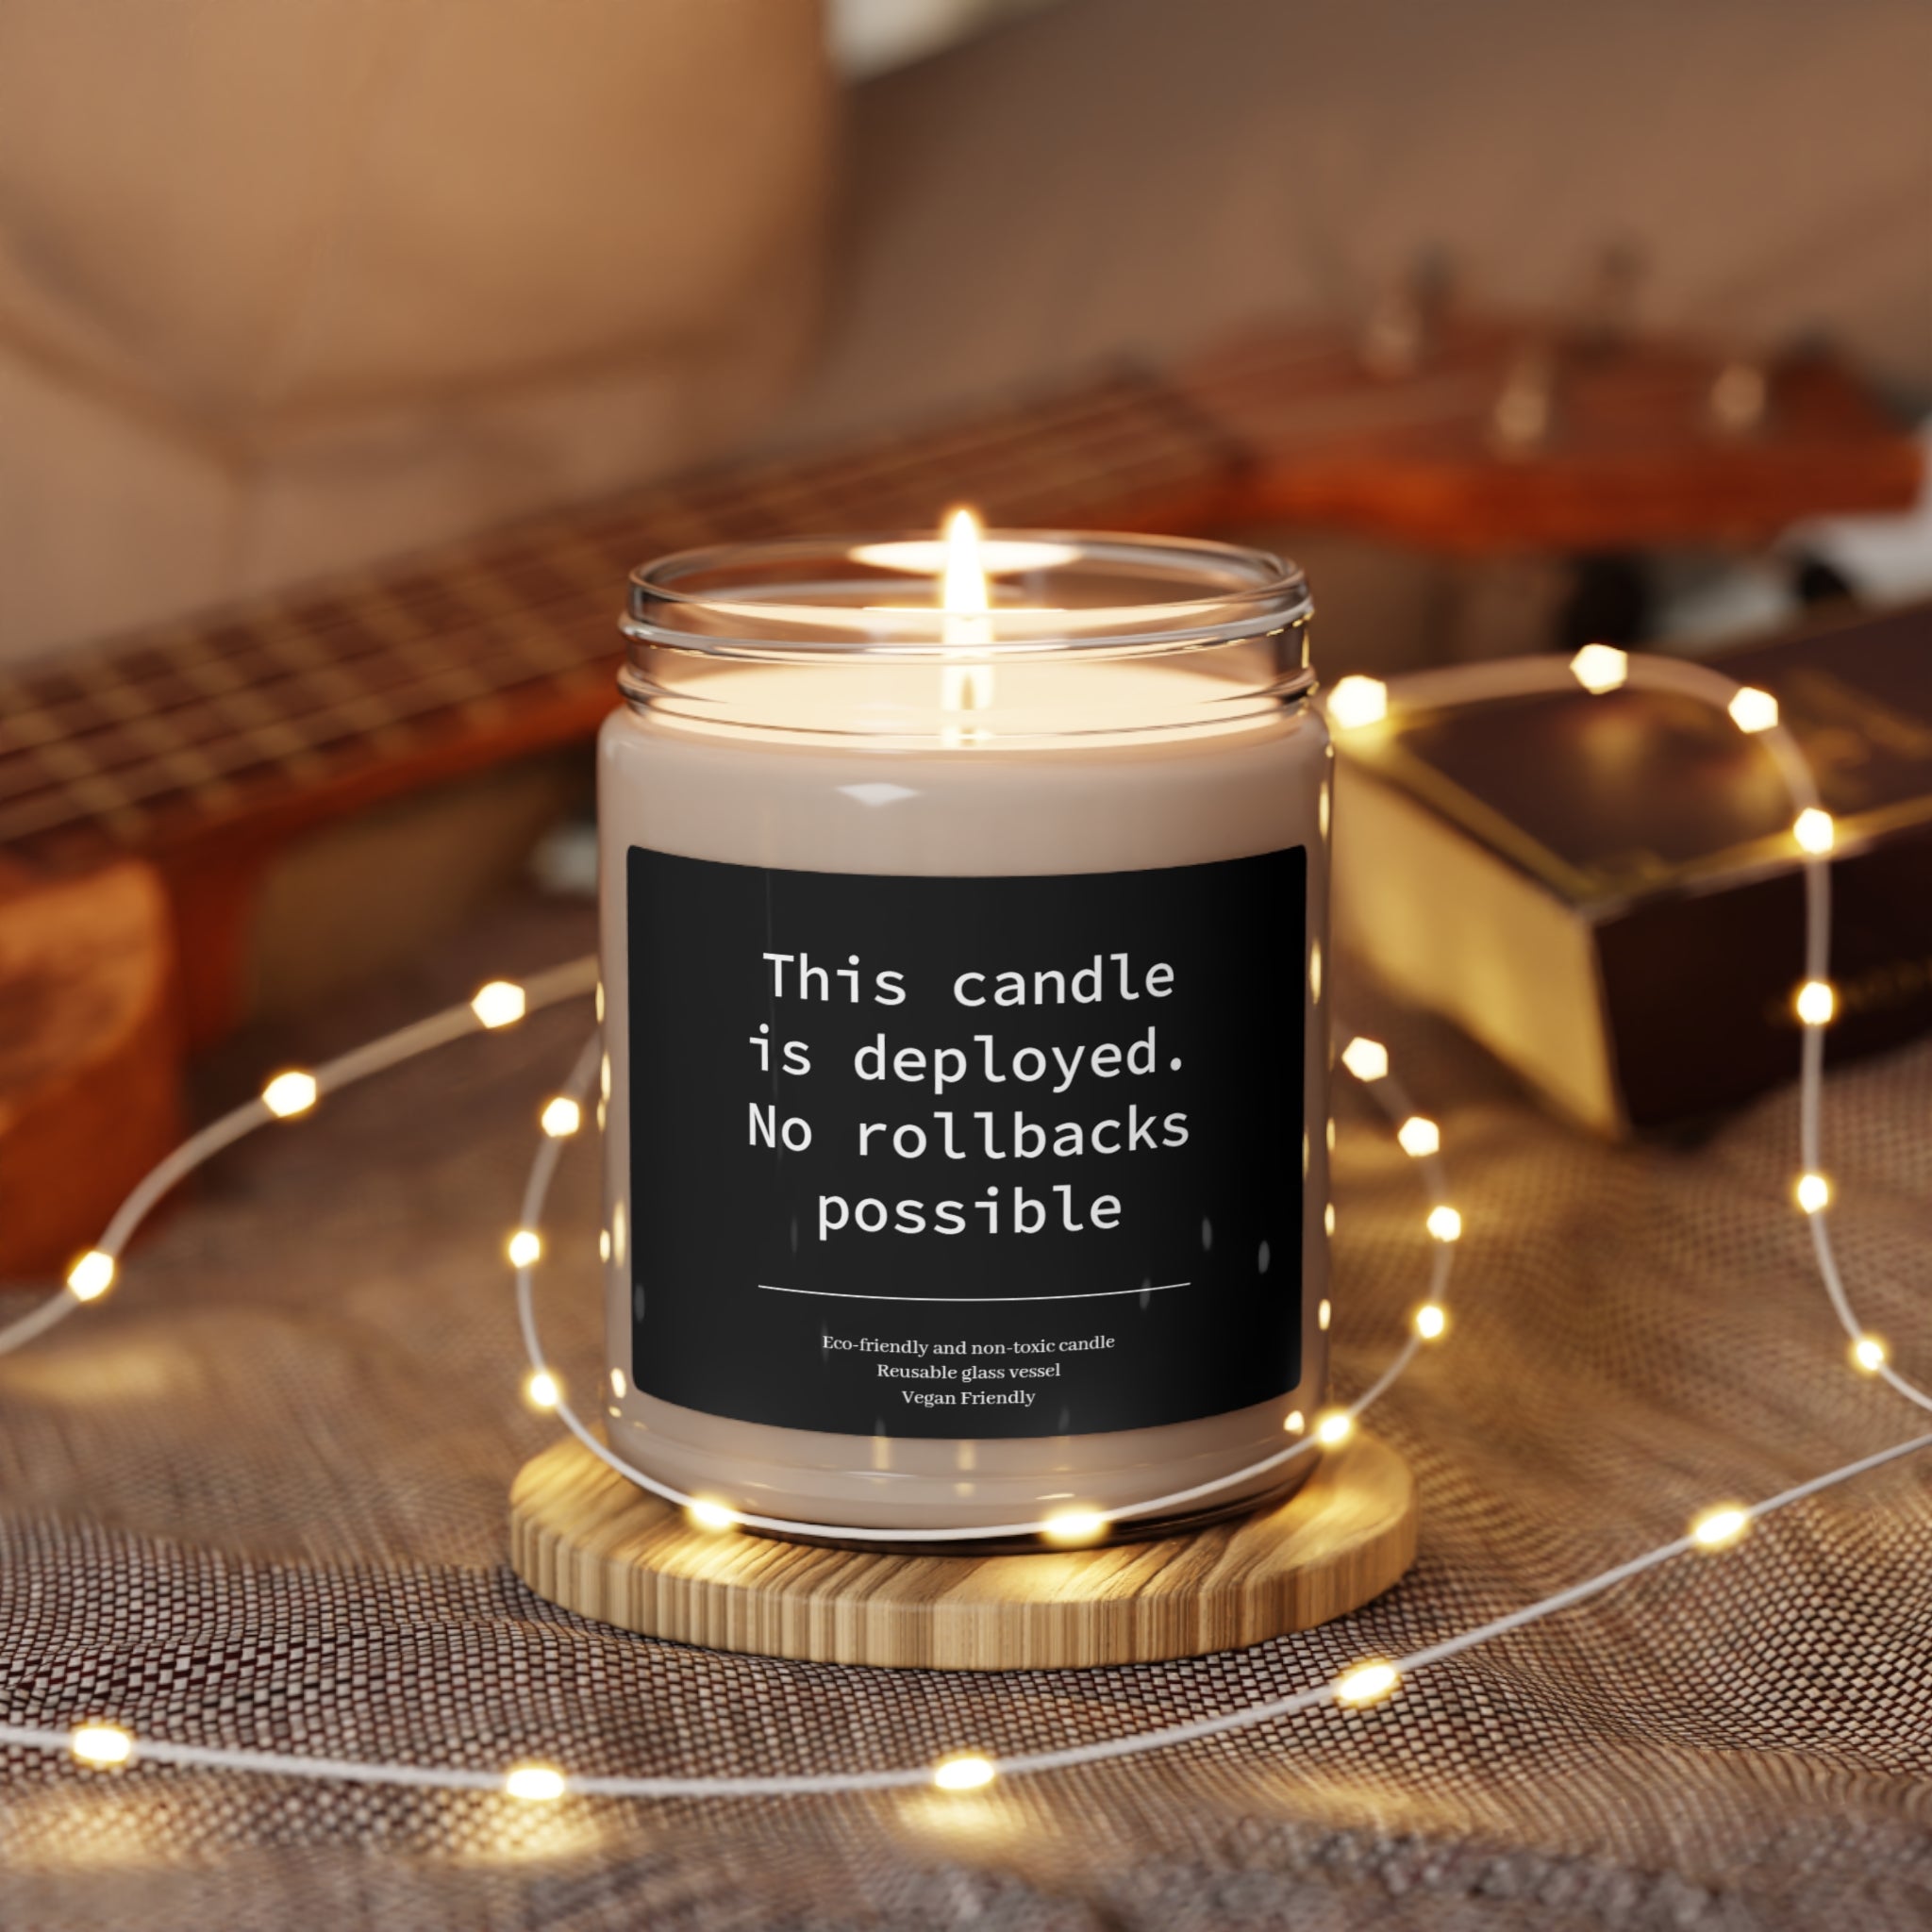 A lit This Candle Deployed - No Rollbacks- Scented Soy Candle with a humorous label surrounded by fairy lights.